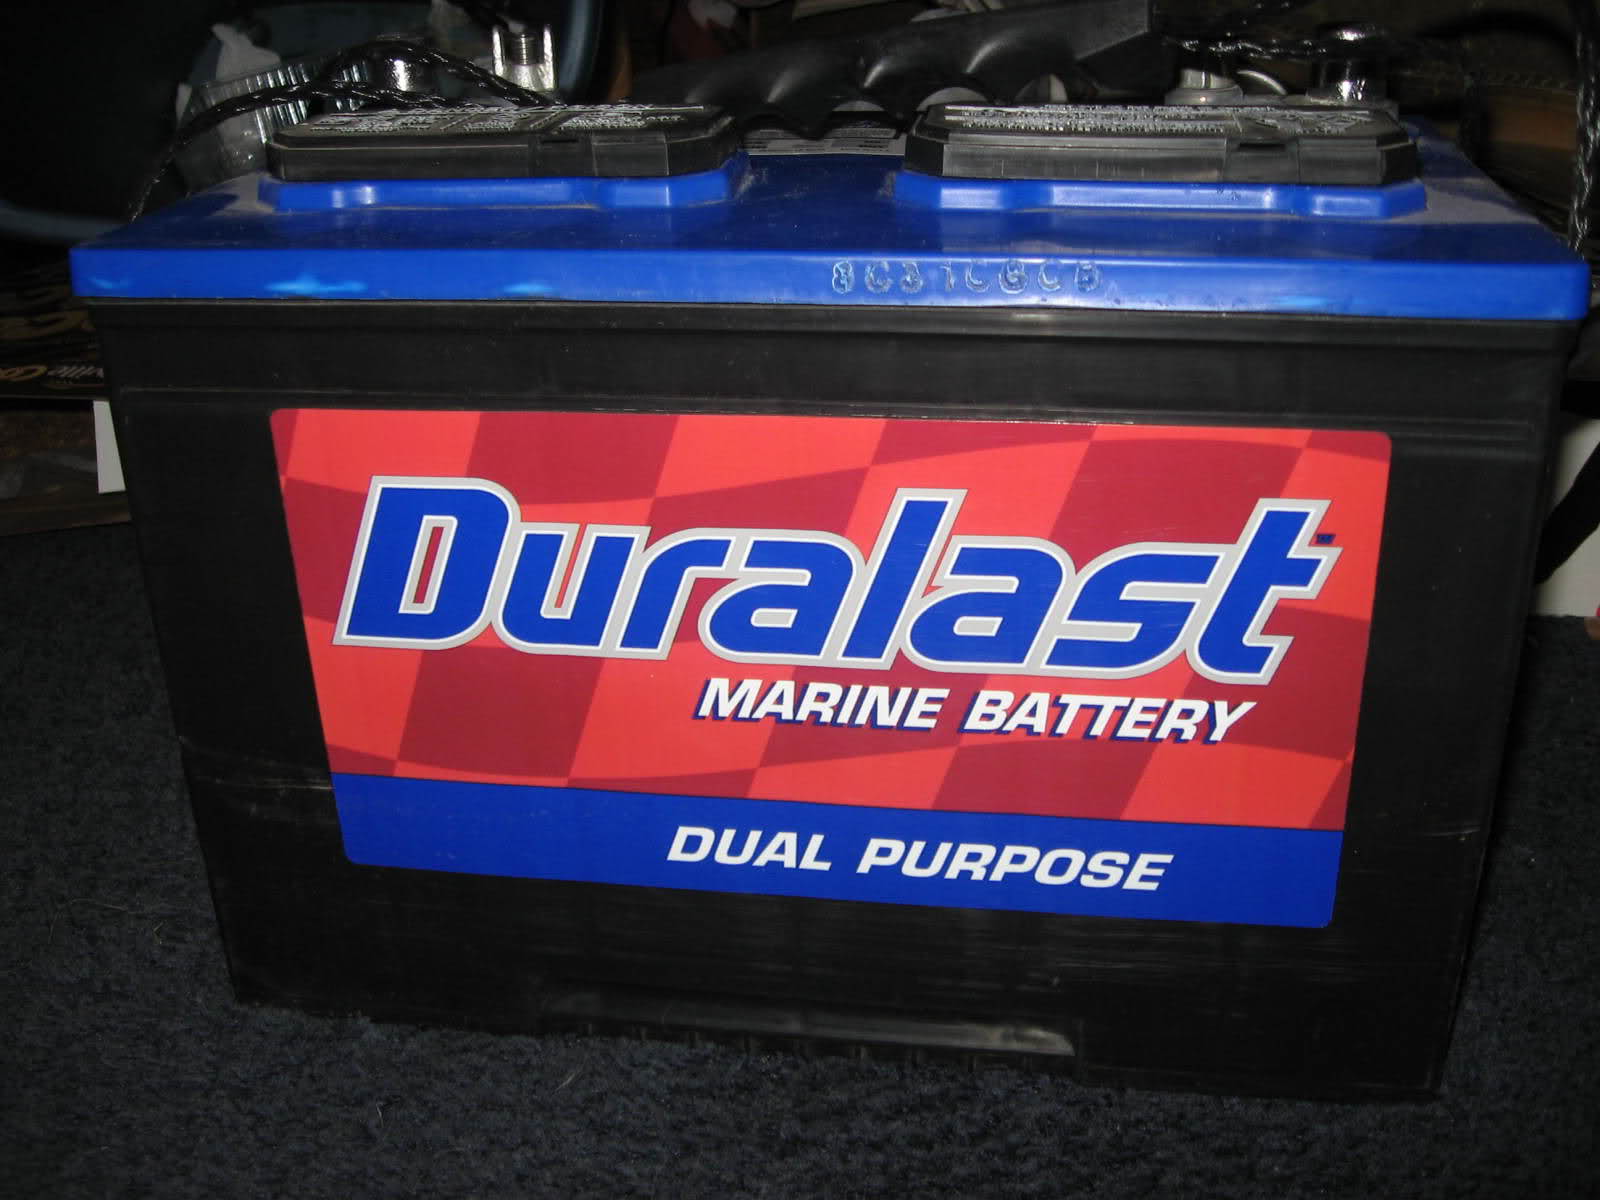 Who makes Duralast Batteries